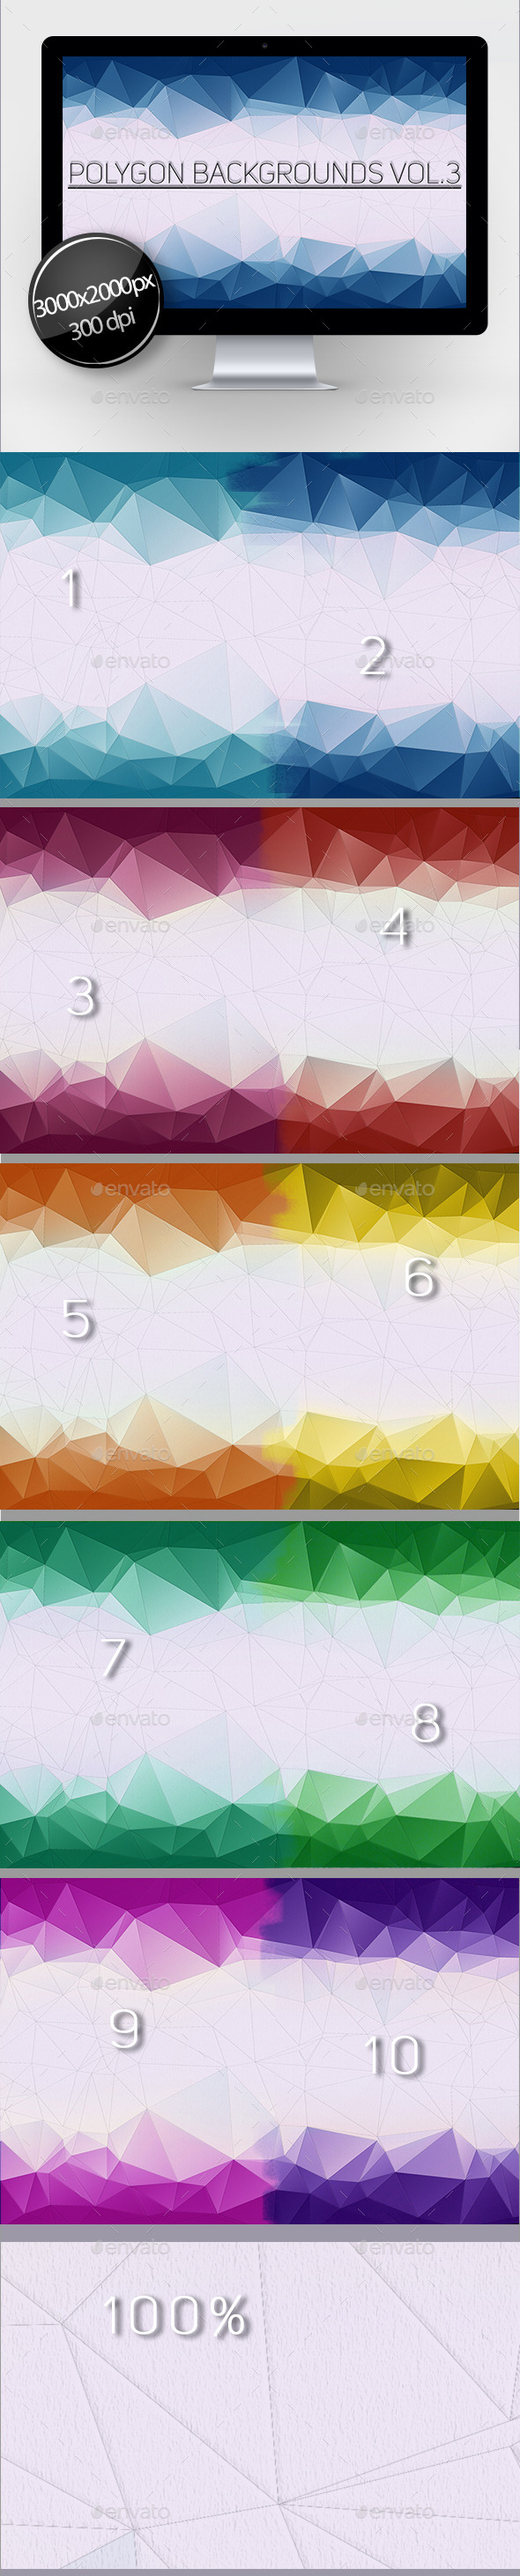 Polygon Backgrounds Vol.3